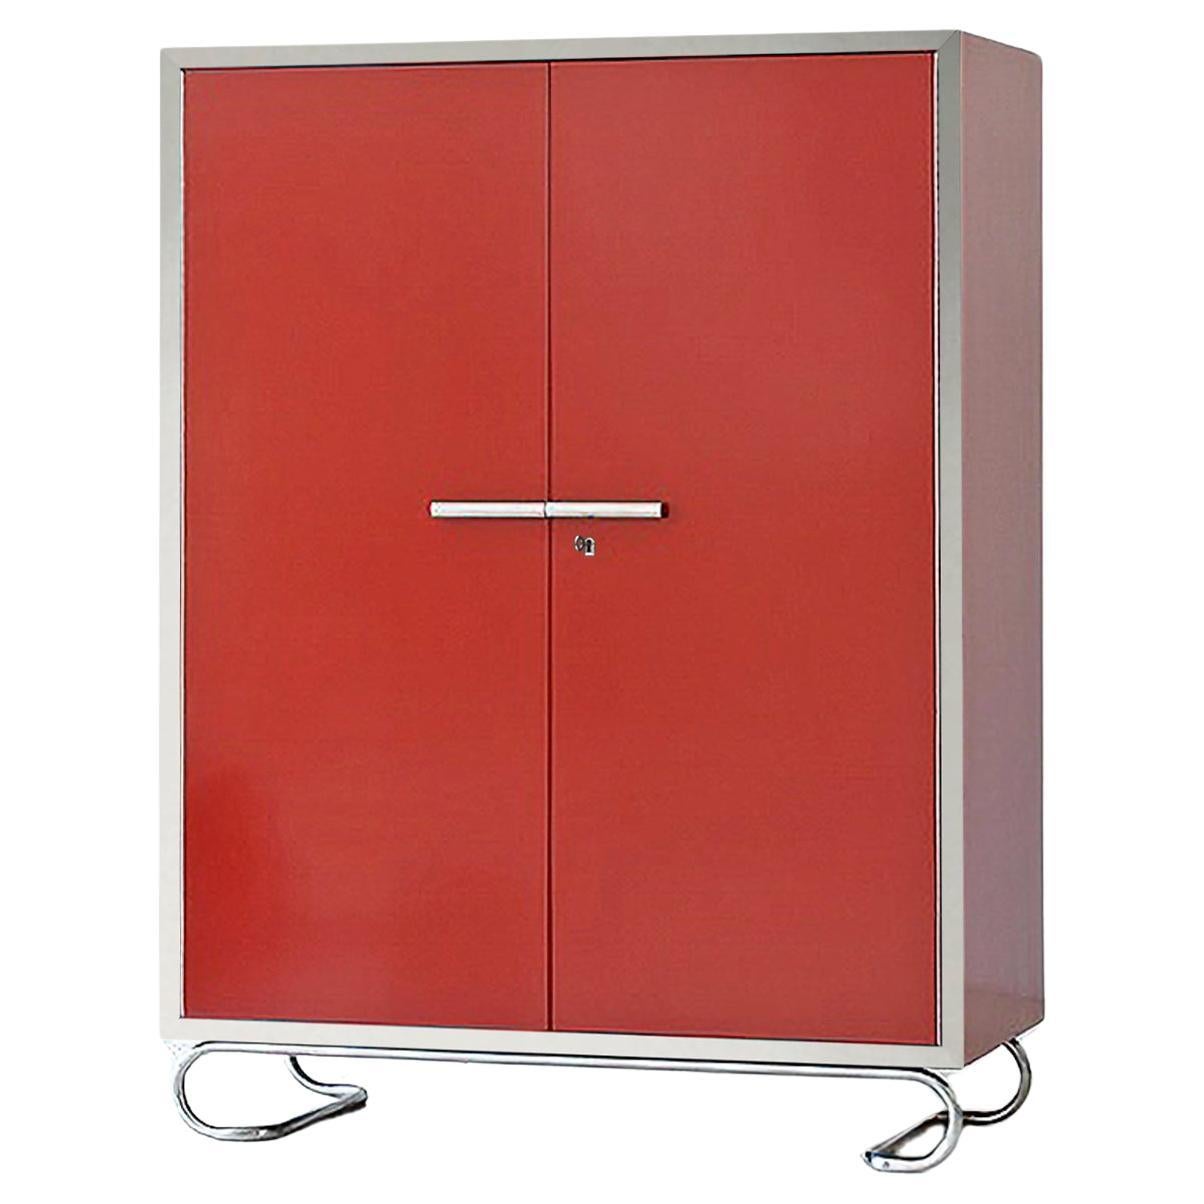 Modernist Storage Cabinet in Lacquered Wood and Tubular Steel Hardware, Bespoke For Sale